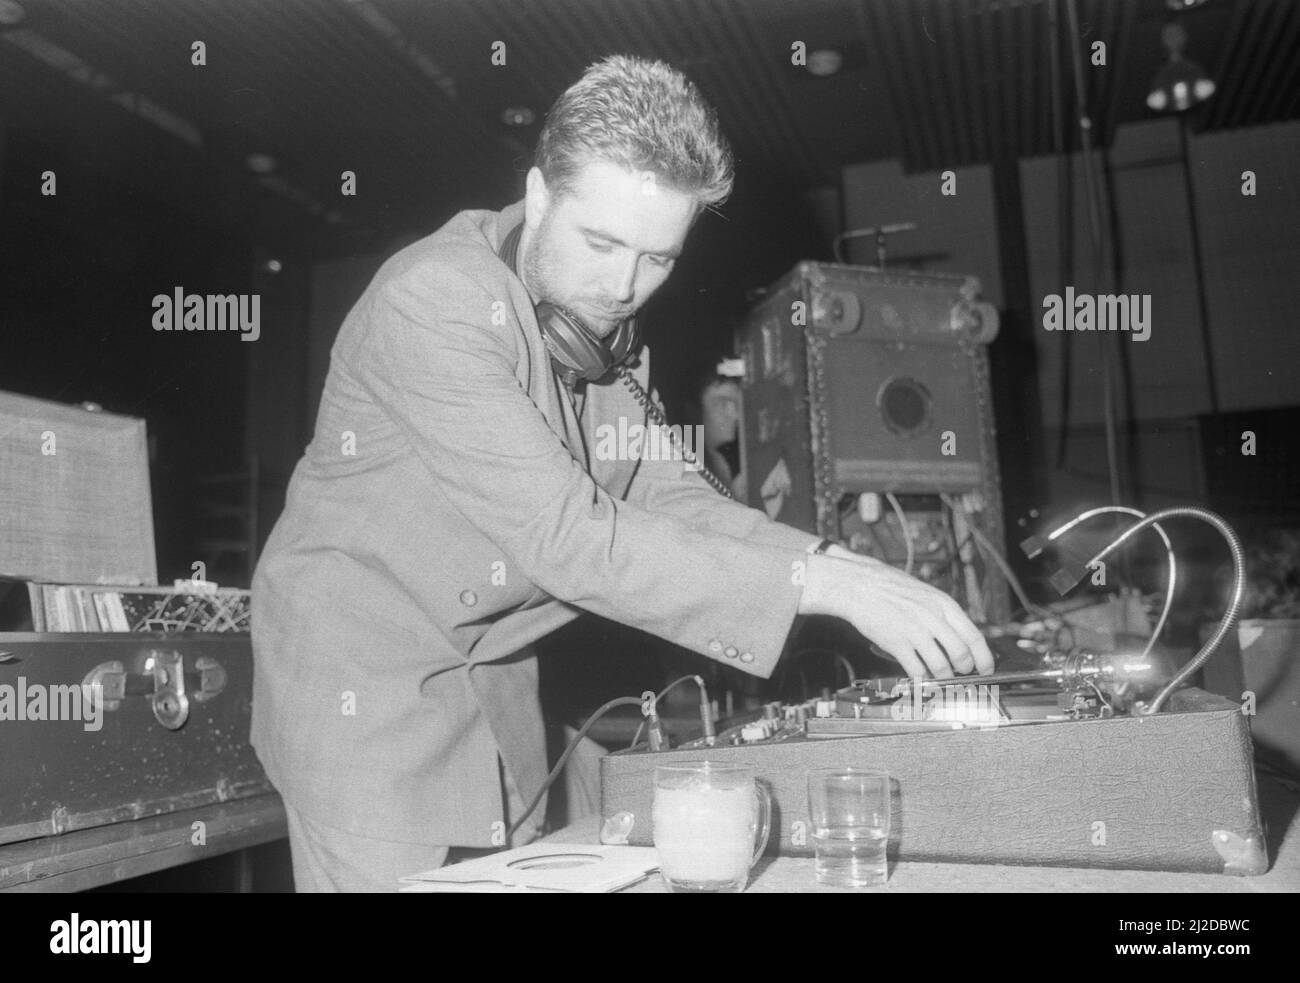 Former Specials keyboard player Jerry Dammers stepped in as DJ at the Cov Aid concert at the Lanchester Polytecnic in aid of famine relief in Ethiopia and Sudan.19th October 1985 Stock Photo